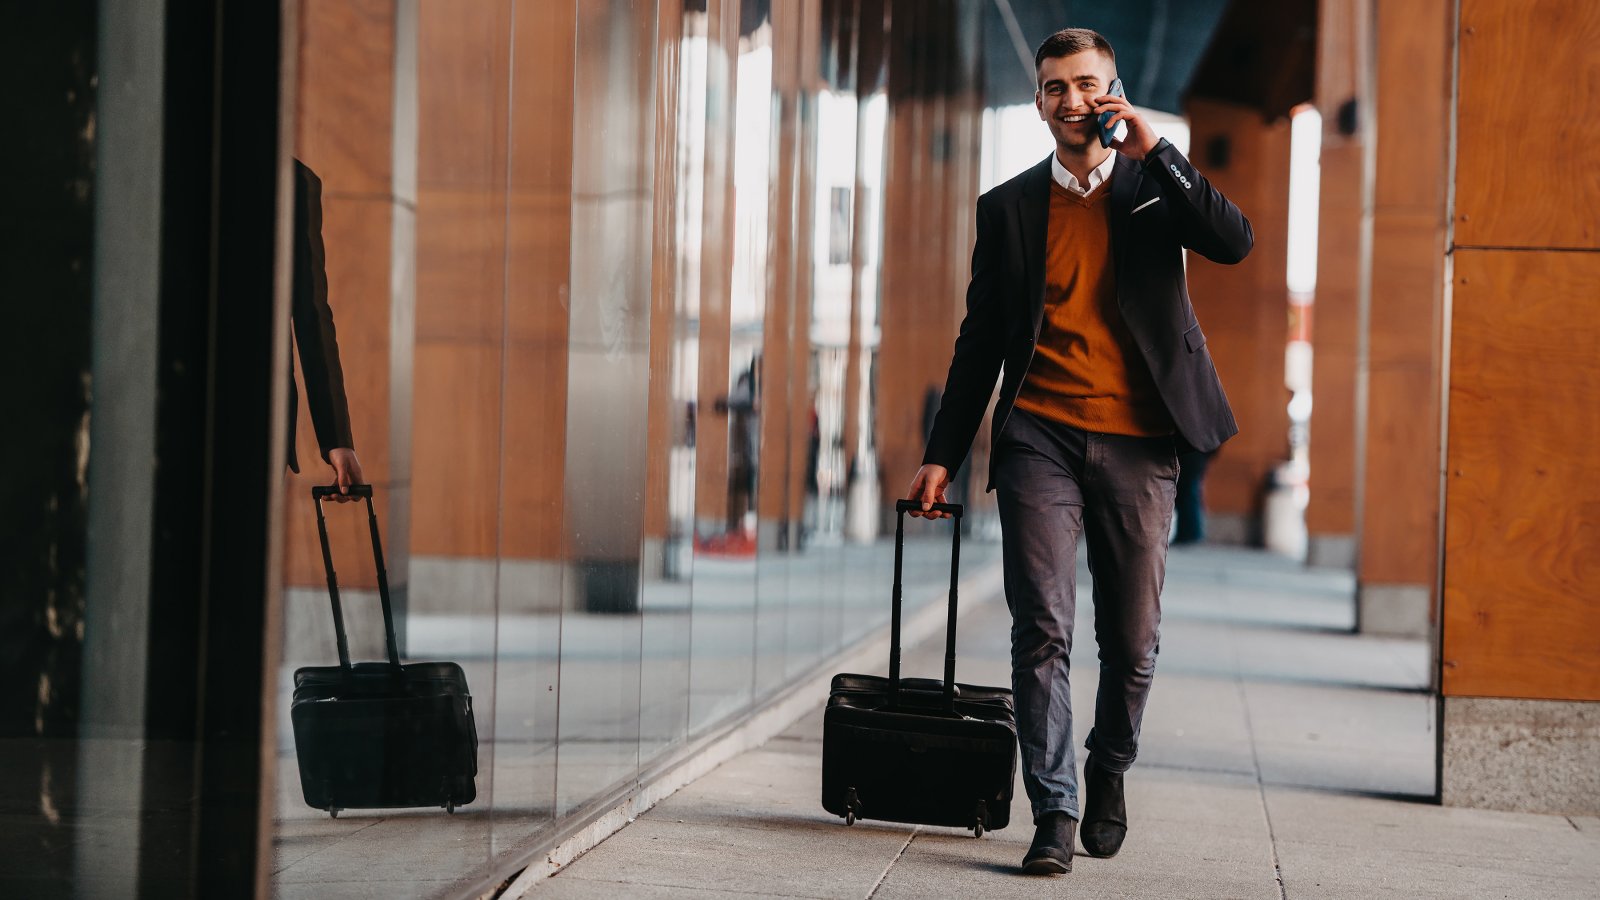 Business traveling? Here’s how to make it fun and more exciting